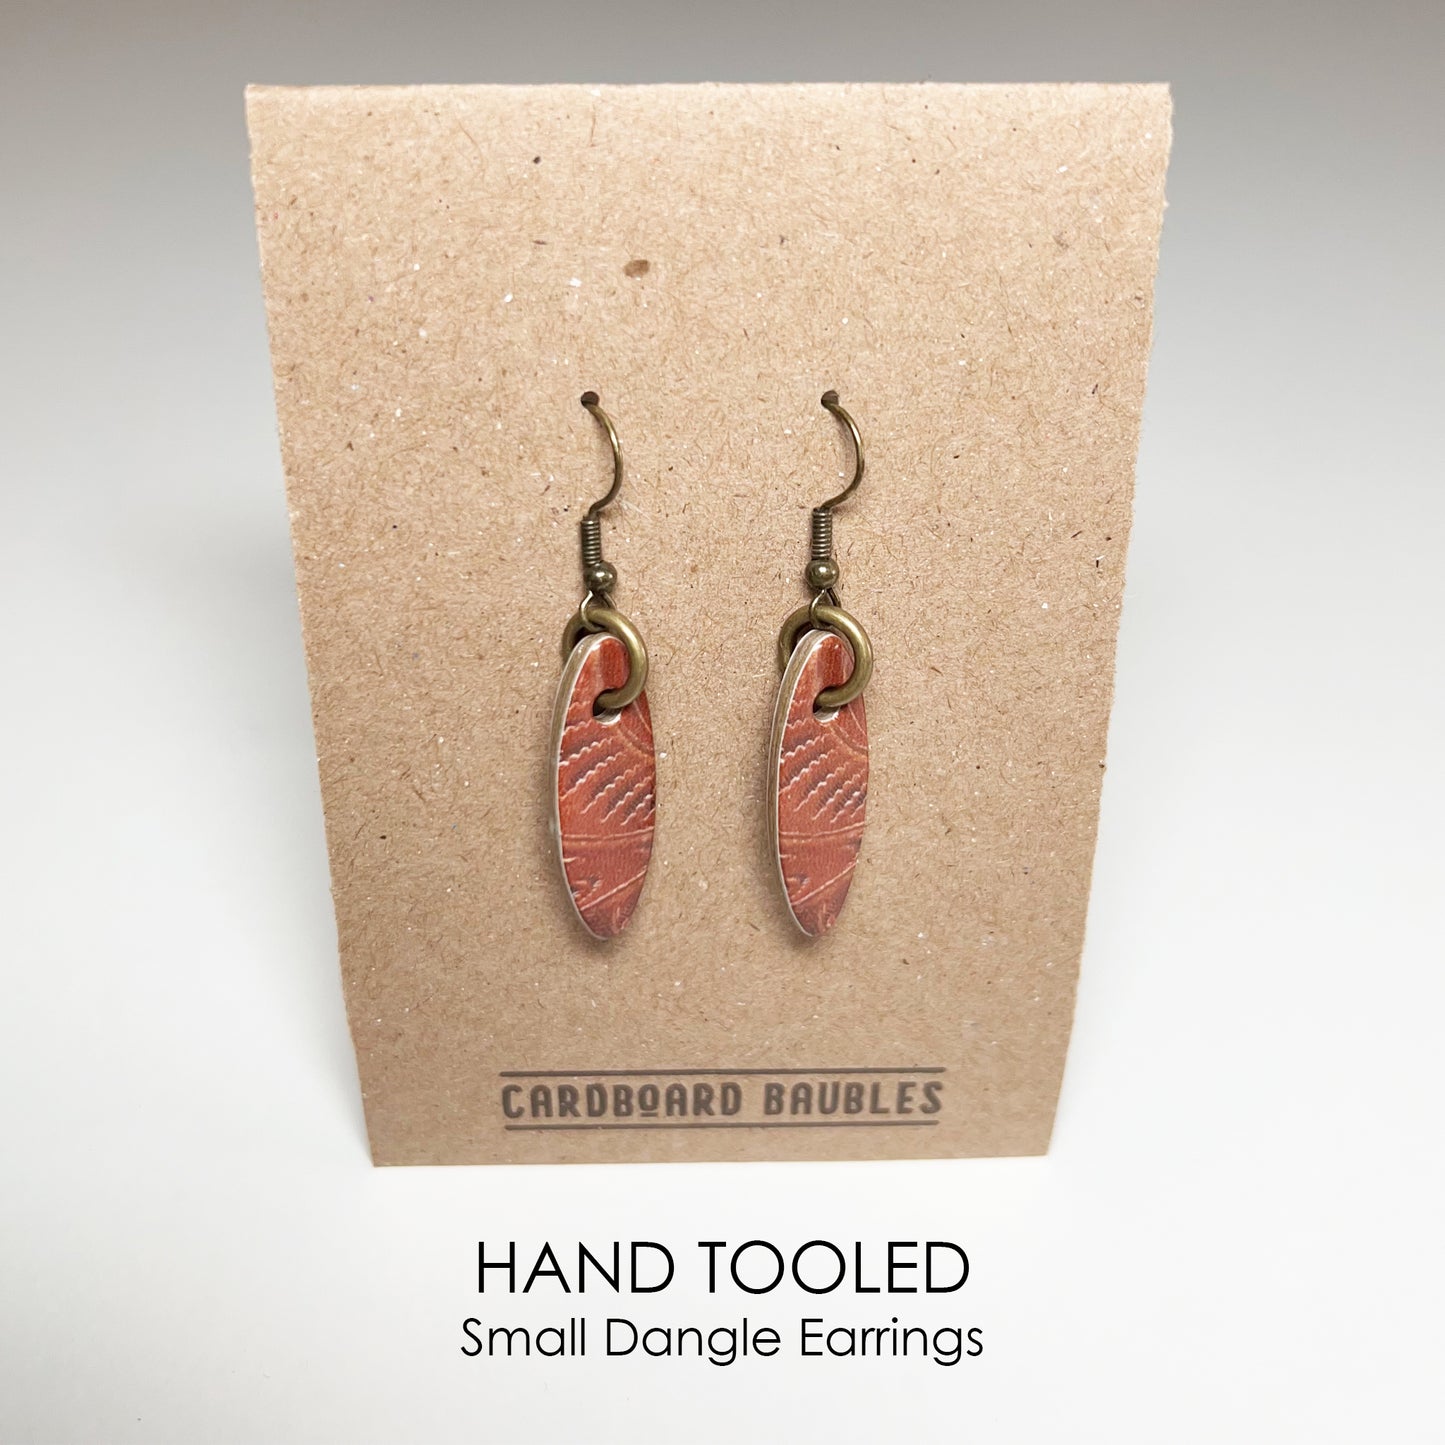 HAND TOOLED - Oval Cardboard Baubles Earrings